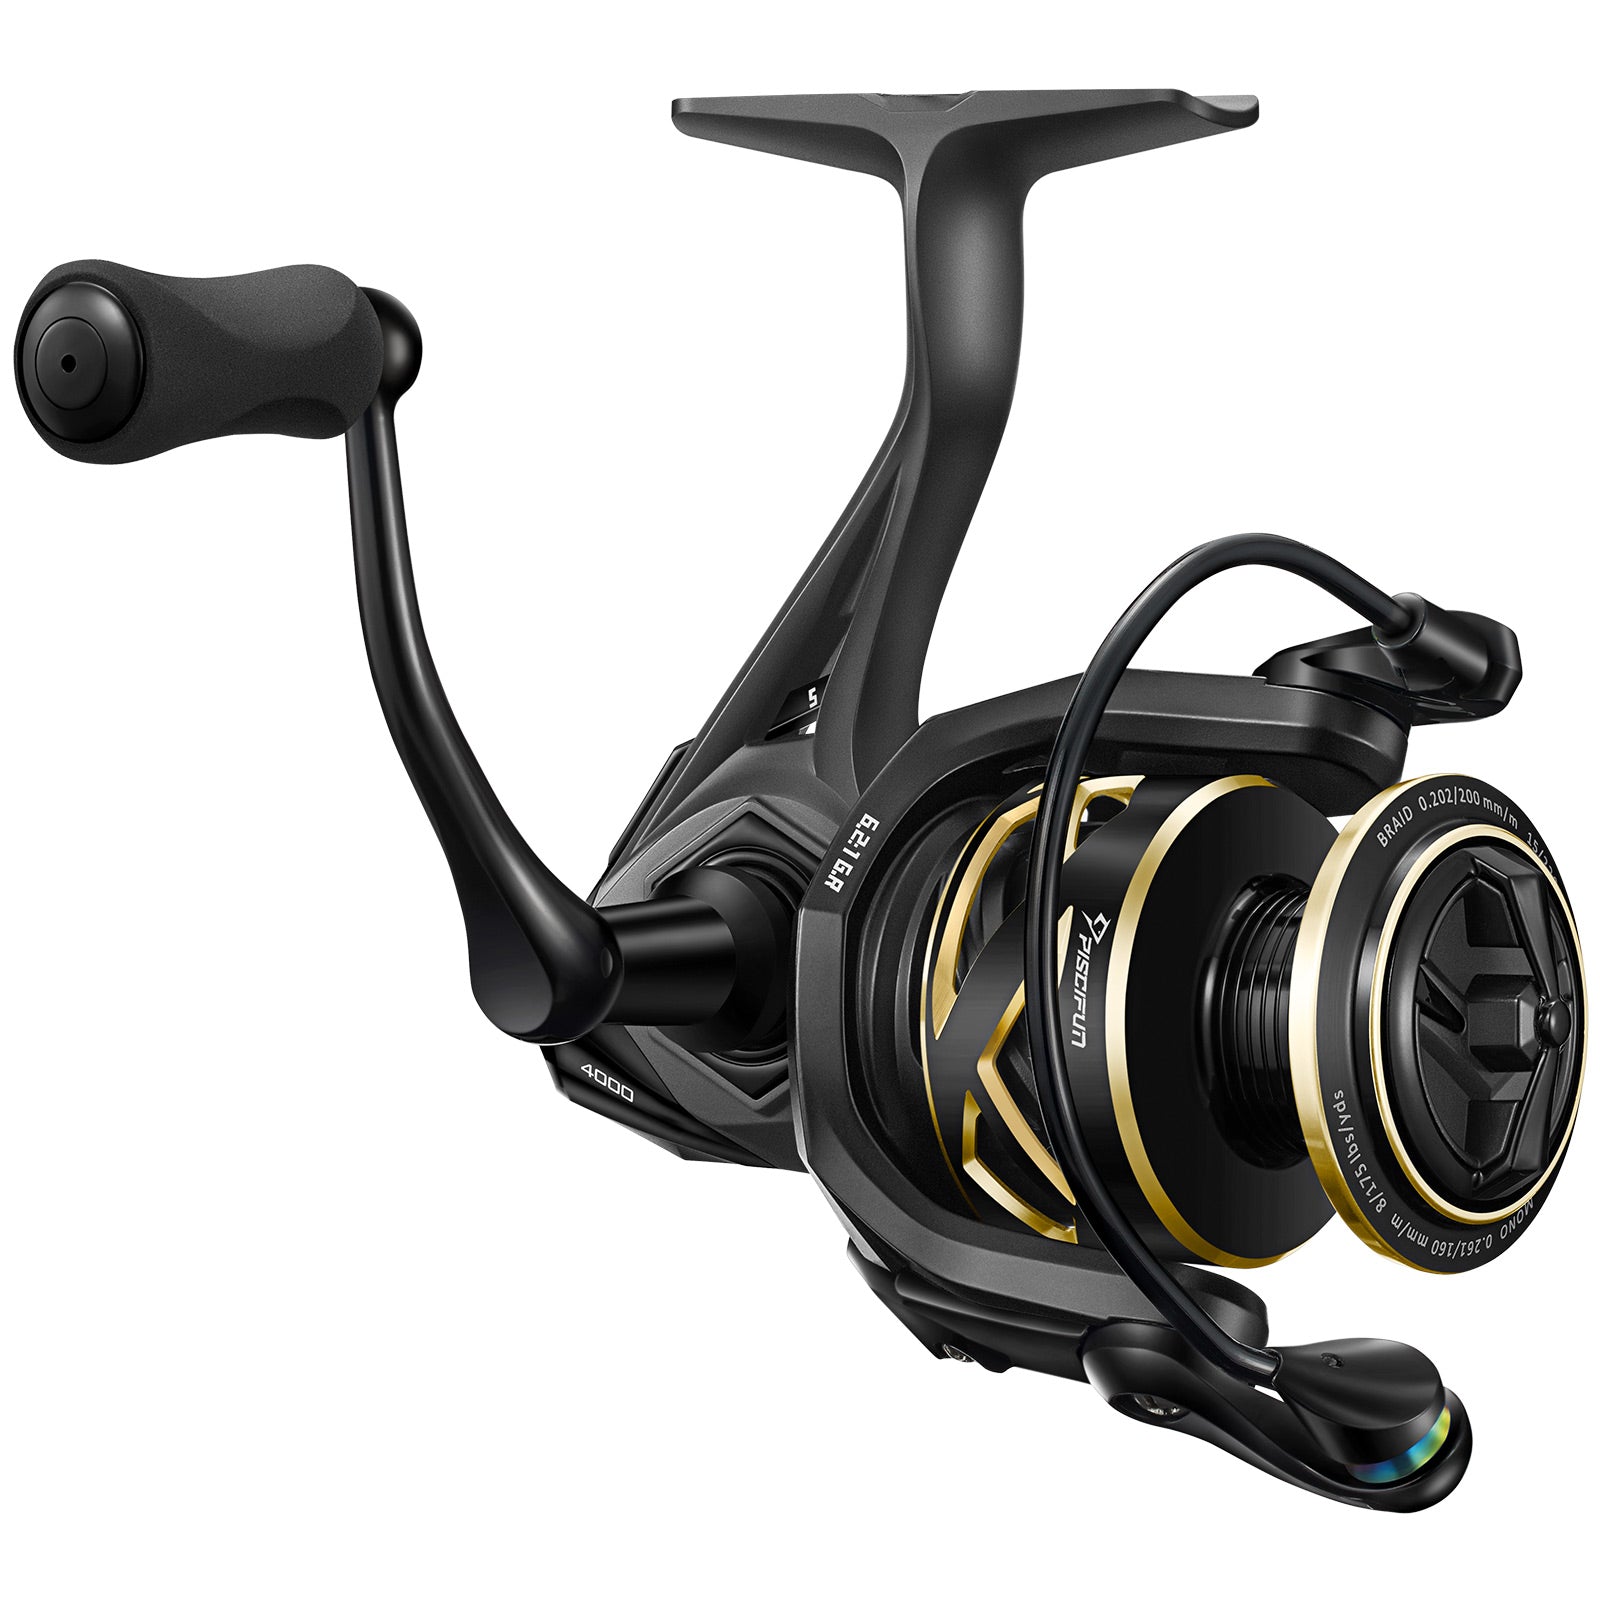 Piscifun® Auric Spinning Reels - Saltwater and Freshwater Spinning Fis |  4000-6.2:1 | Piscifun